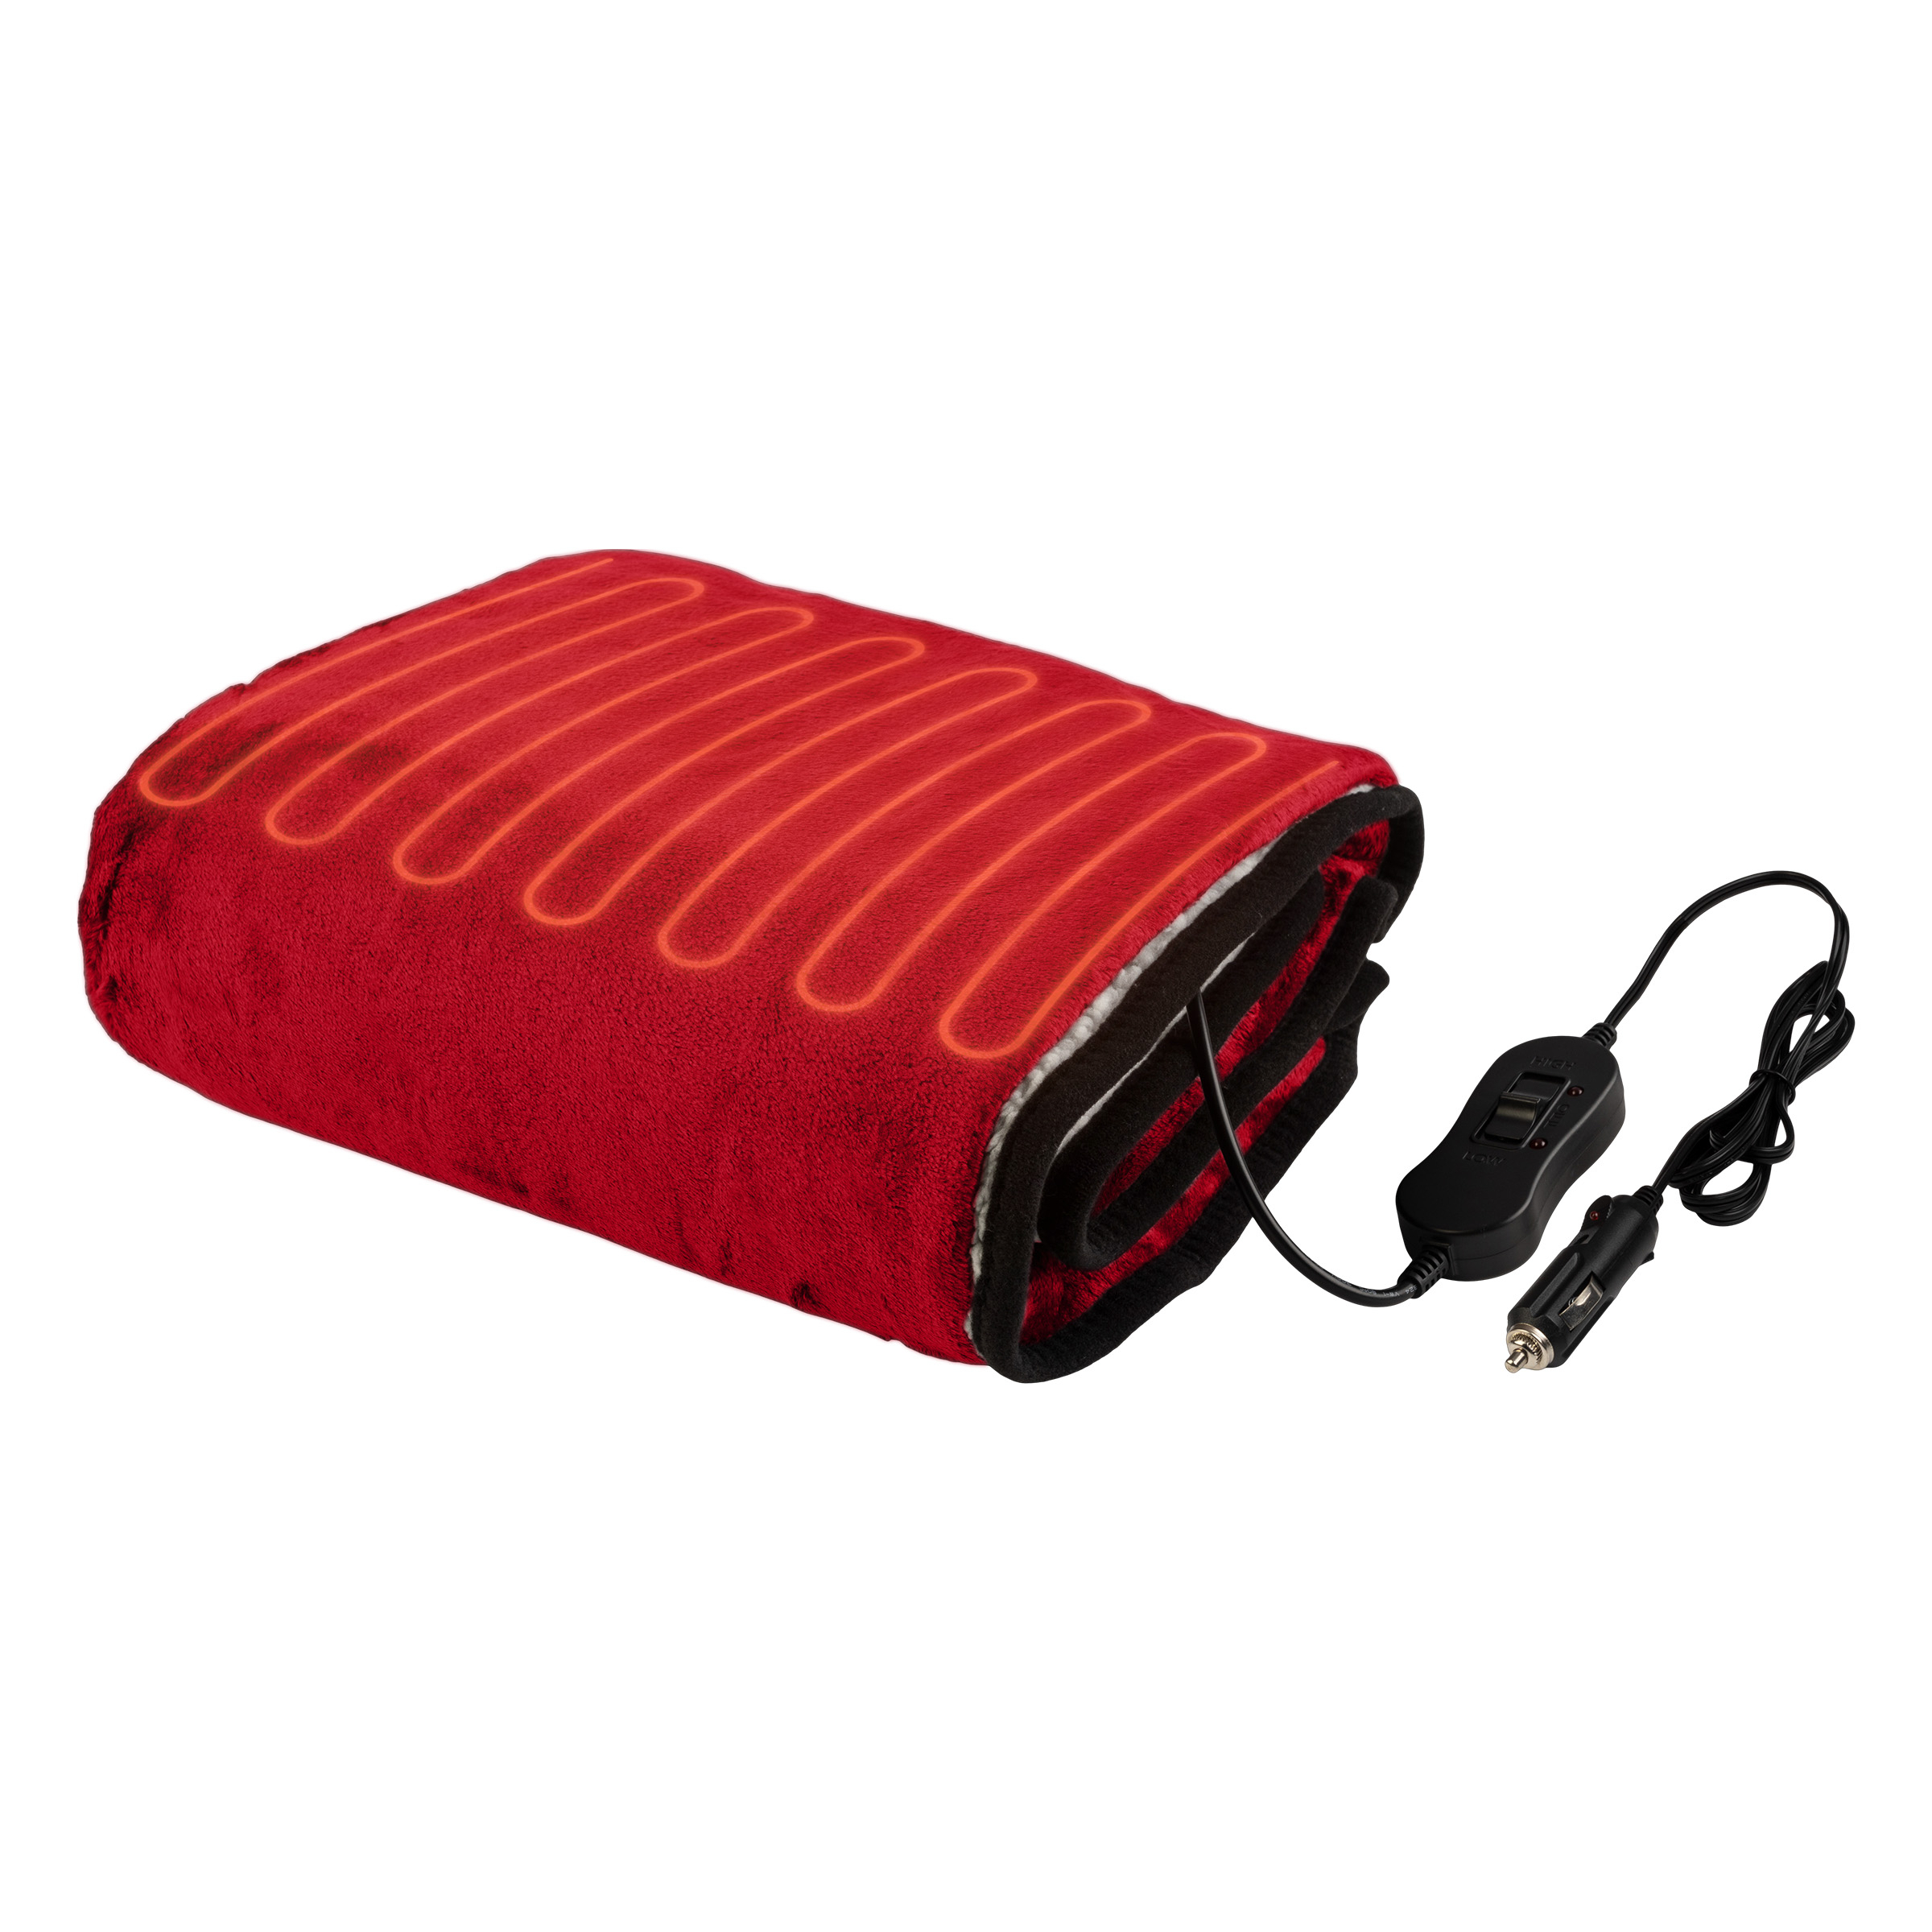 Heated Blanket Portable 12V Electric Travel Blanket For Car, Truck, Or RV - Red